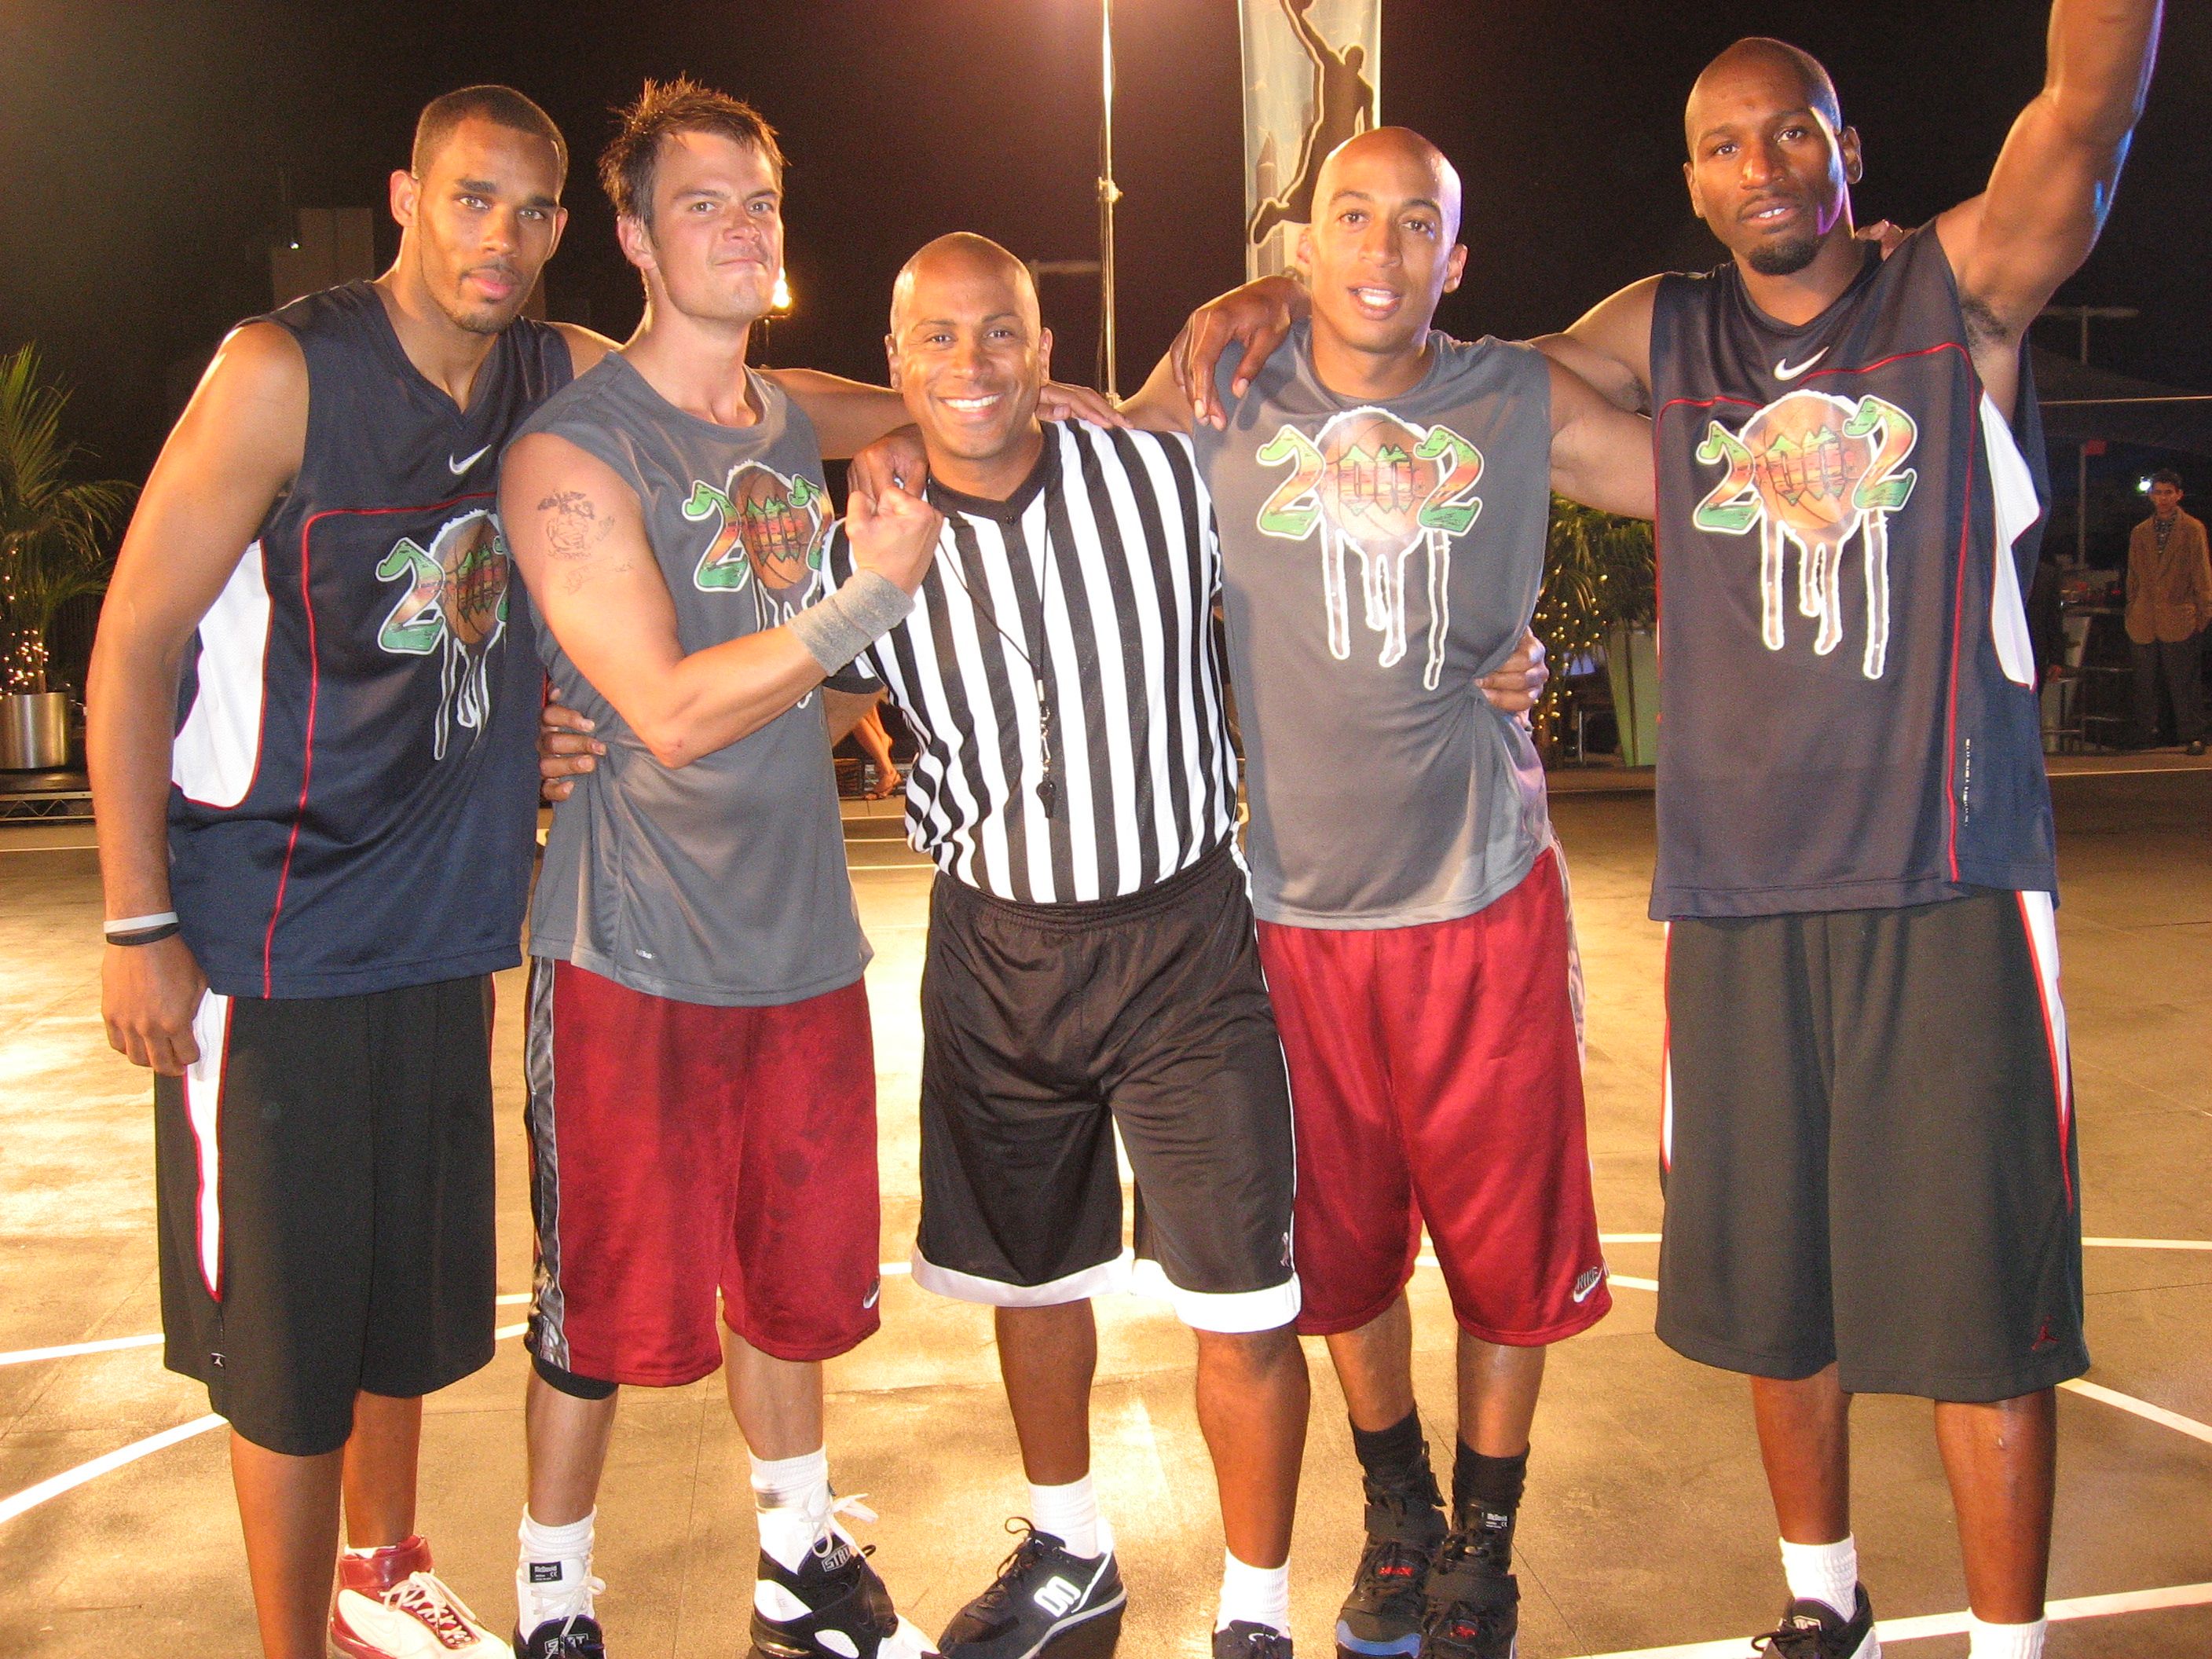 Julian referees a basketball game with Josh Duhamel and fellow actors on an episode of Las Vegas (2008 - TV series)